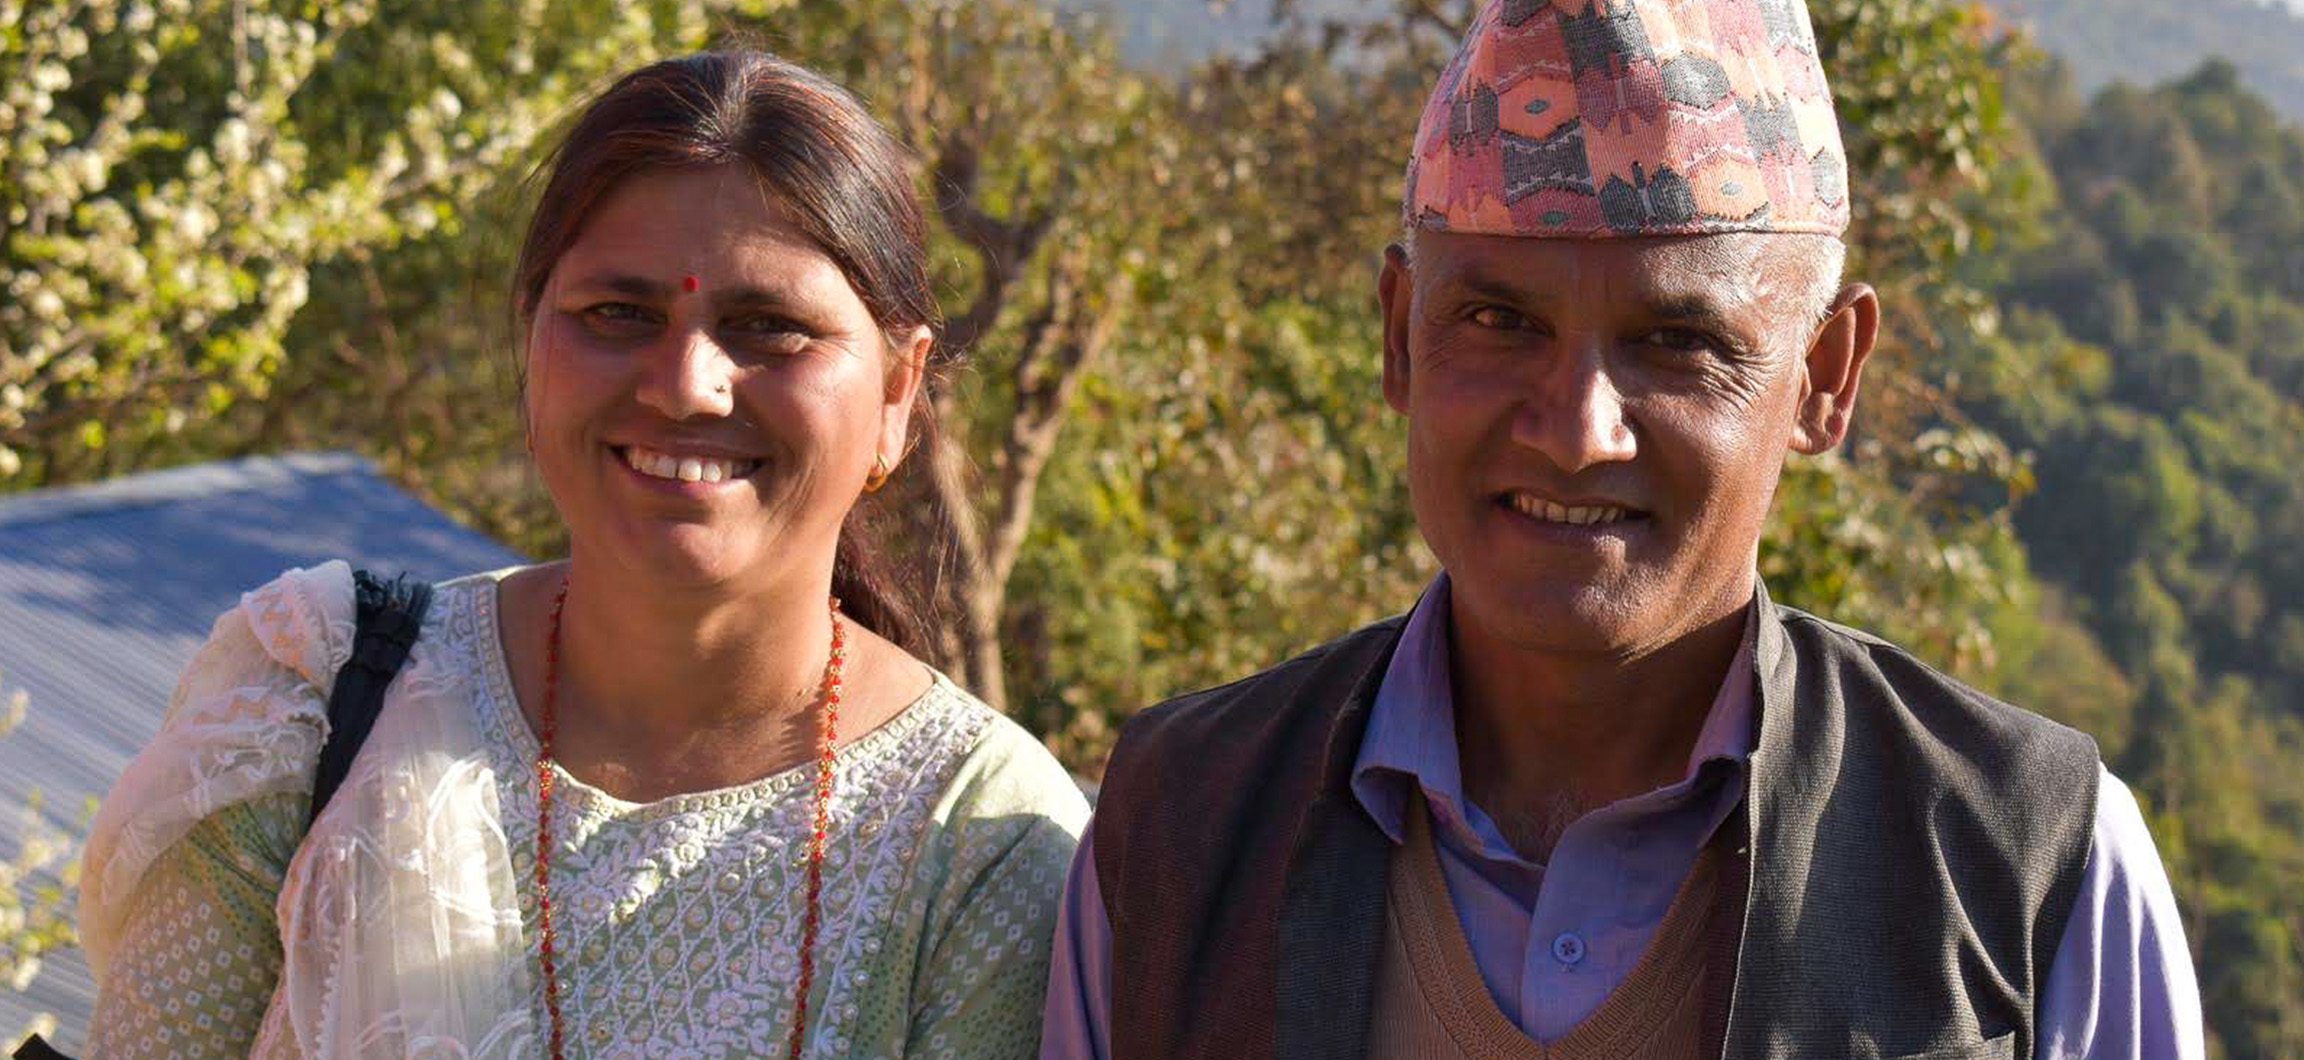 Gayatri and her husband, Bishwo, stand together smiling at the camera near their farm.